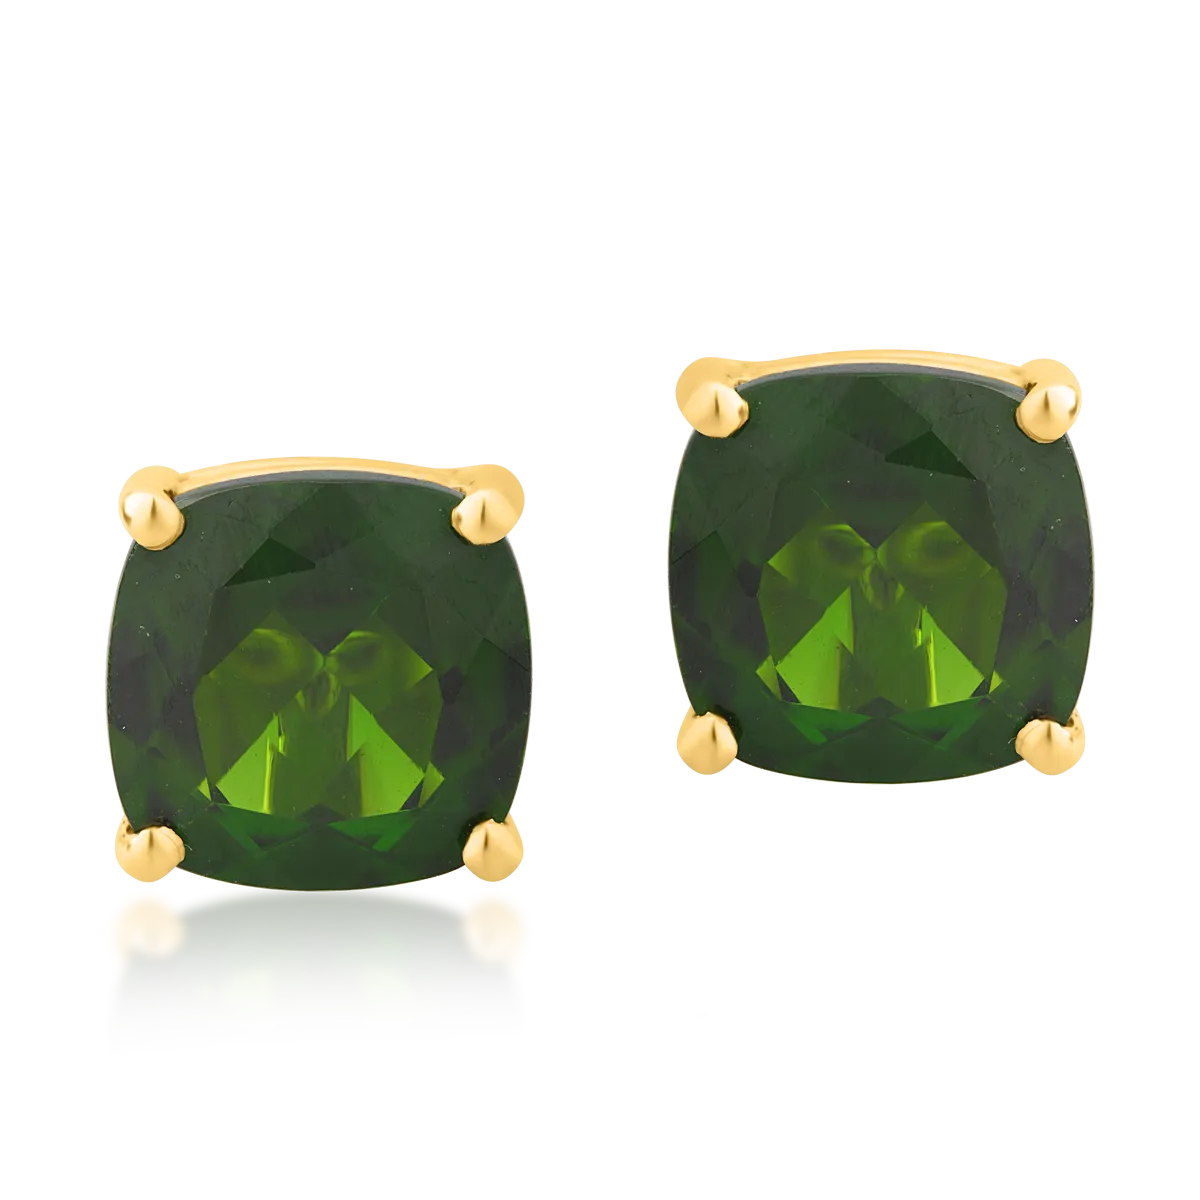 14K yellow gold earrings with 4.35ct chrome diopside